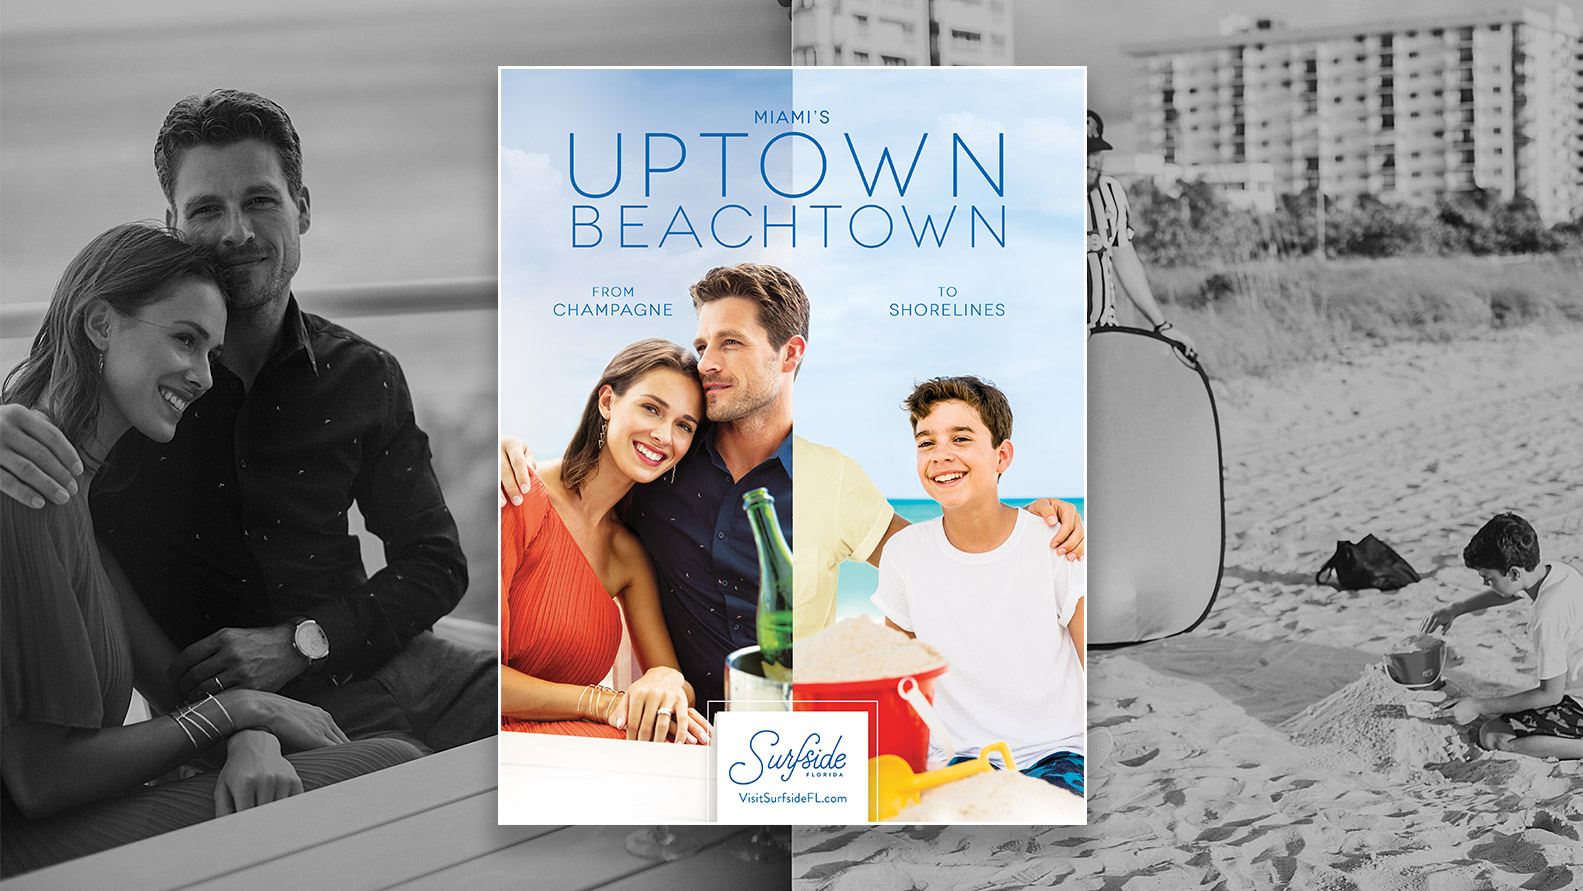 Jacober Creative Identity and Campaign for the Town of Surfside Florida - Photo of magazine ads for the Uptown Beachtown campaign. Man is embracing his family. To the left is enjoying champagne with Woman, child on the right is at the beach